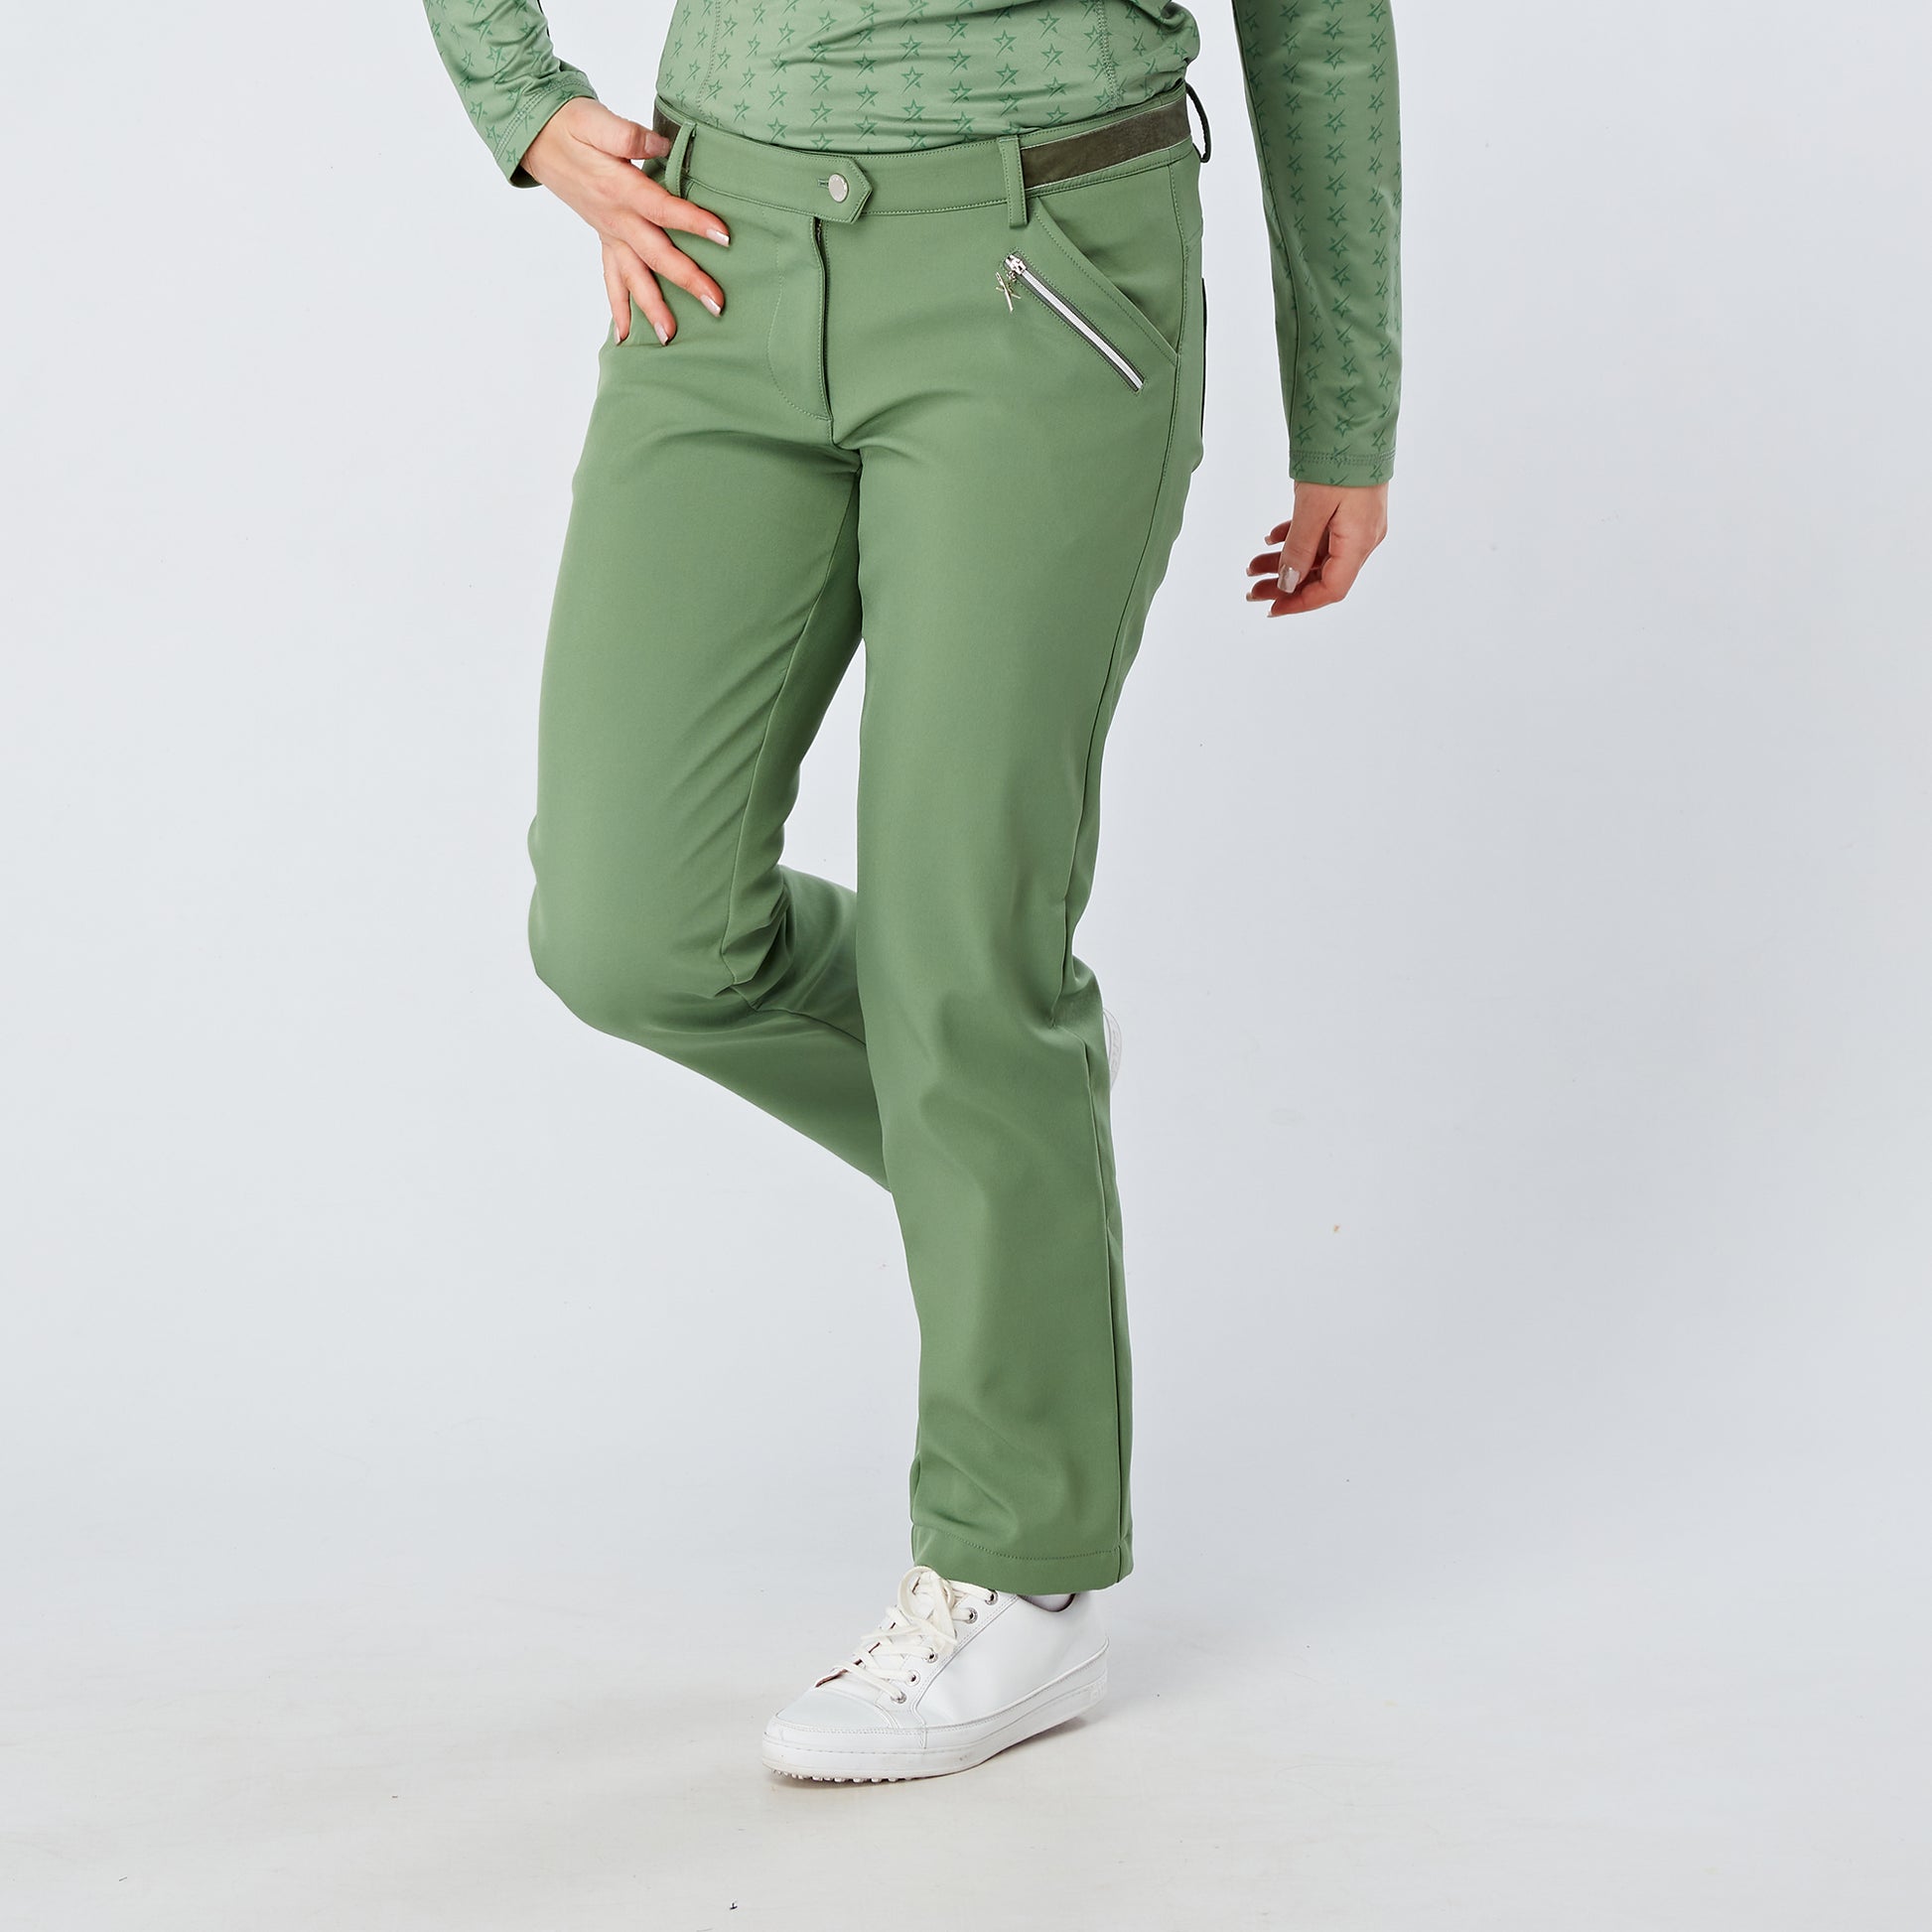 Swing Out Sister Ladies Windstopper Water Resistant Thermal Trousers in Sage